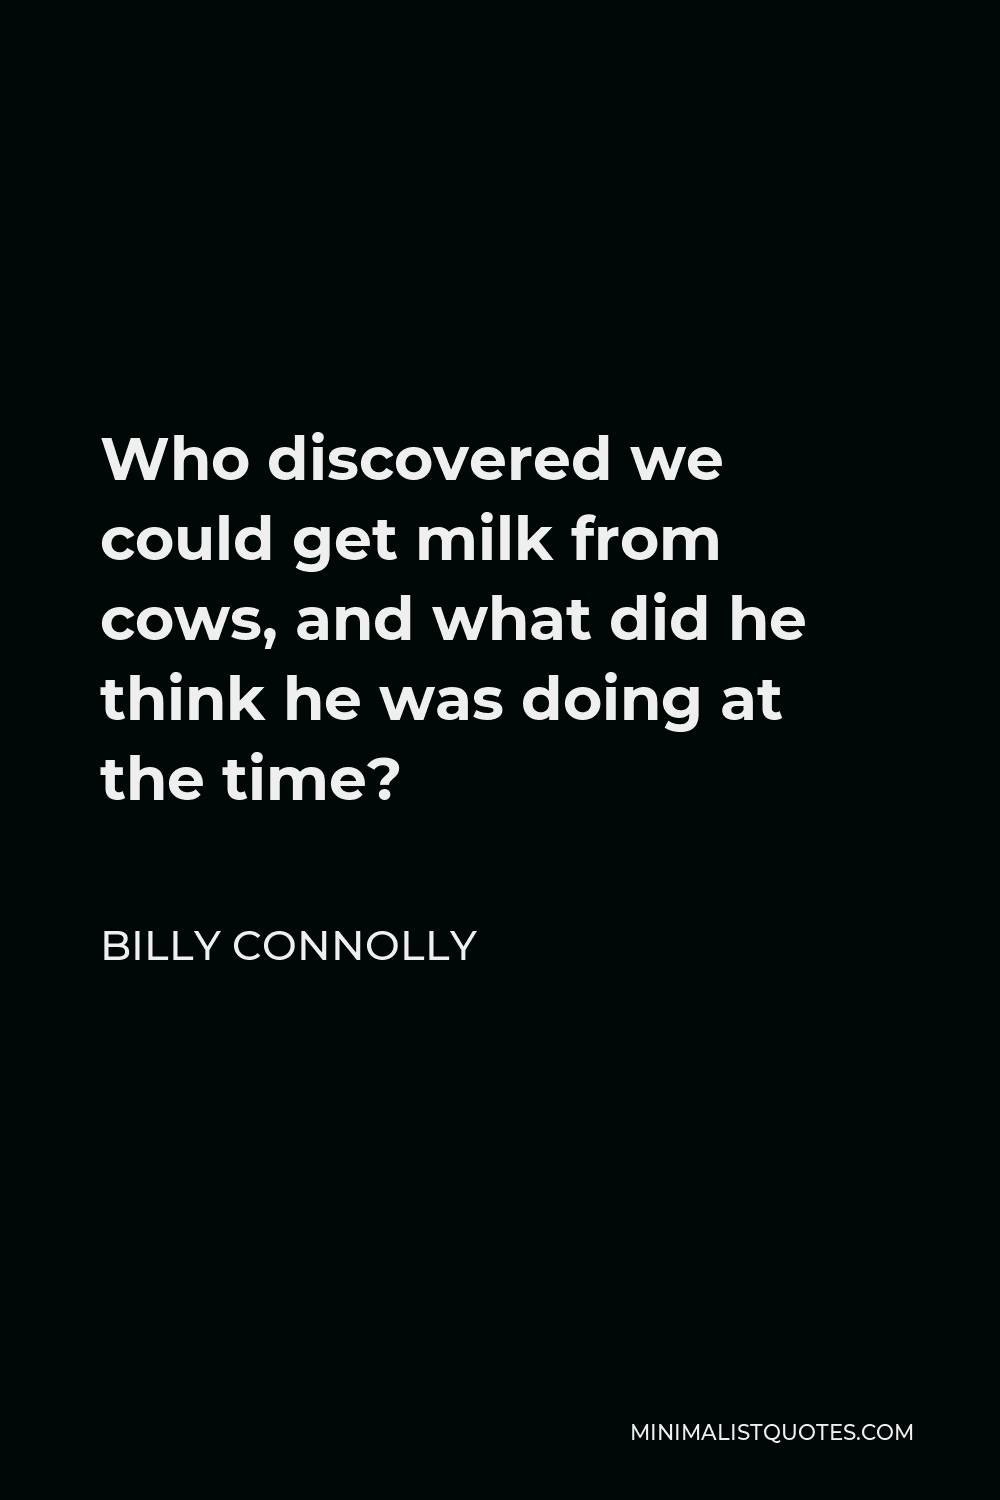 Billy Connolly Quote - Who discovered we could get milk from cows, and what did he think he was doing at the time?